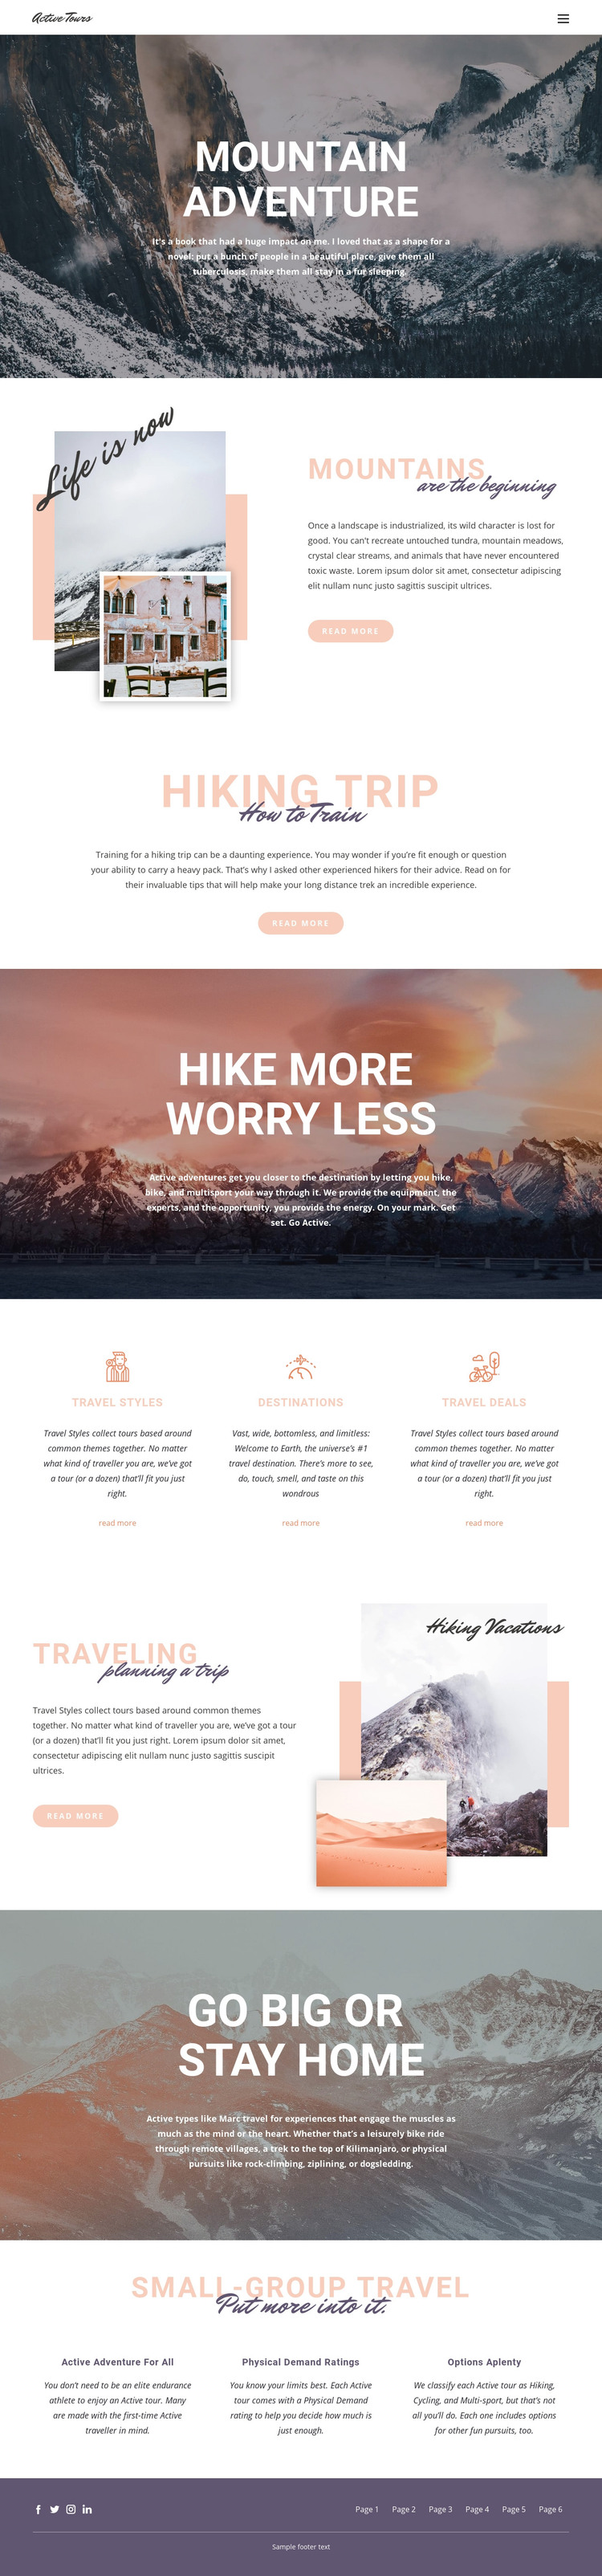 Guided backpacking trips Homepage Design